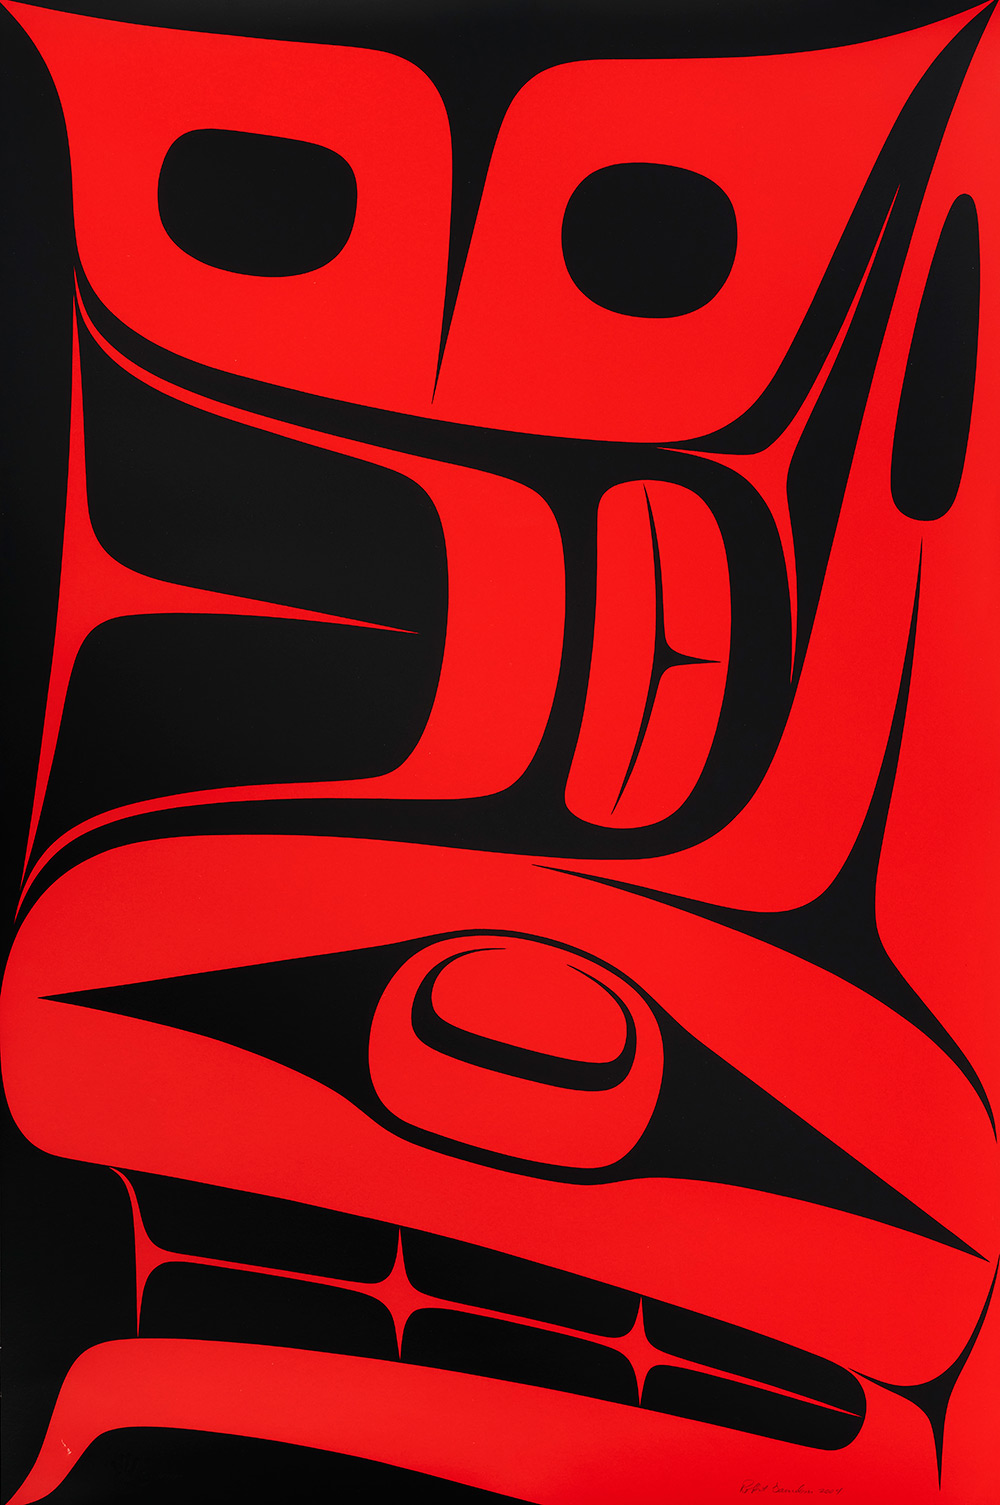 Robert Davidson (Haida, b. 1946), "Southeast Wind," 2004, 60 x 40 inches, gift of George and Colleen Hoyt